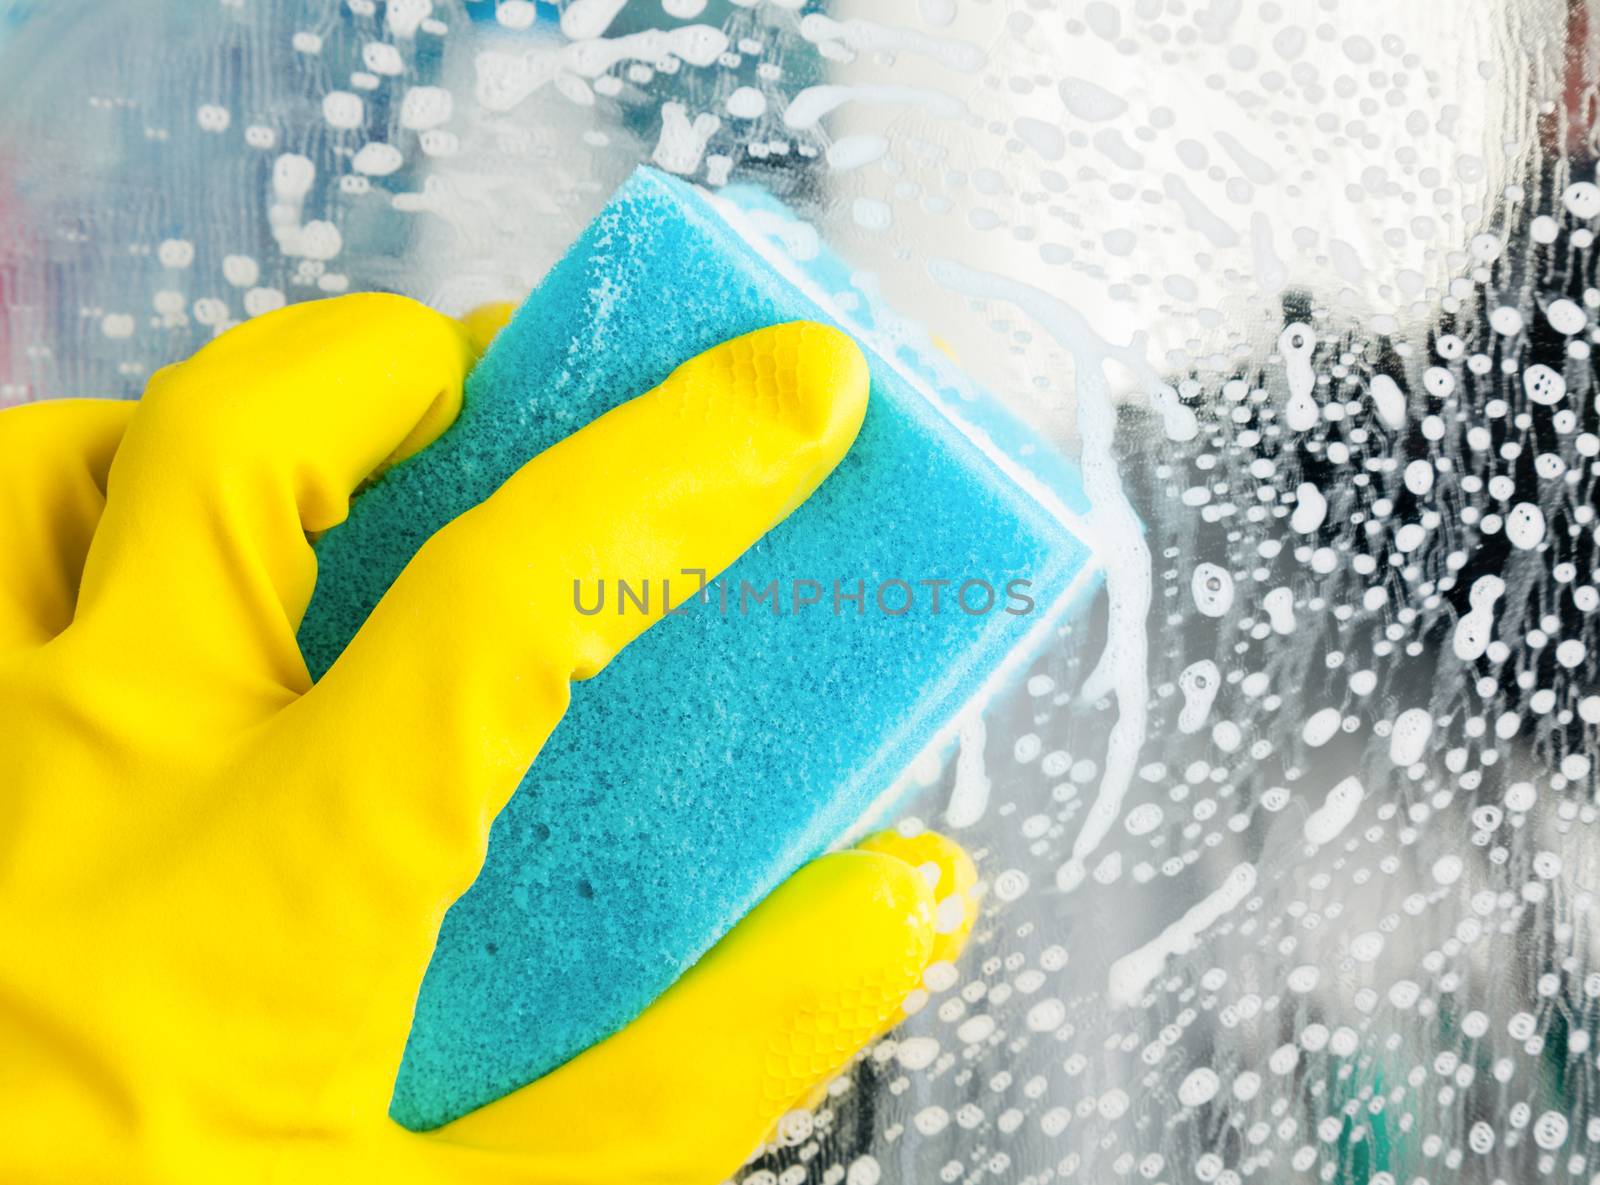 Hand in yellow protective glove cleaning glass with sponge